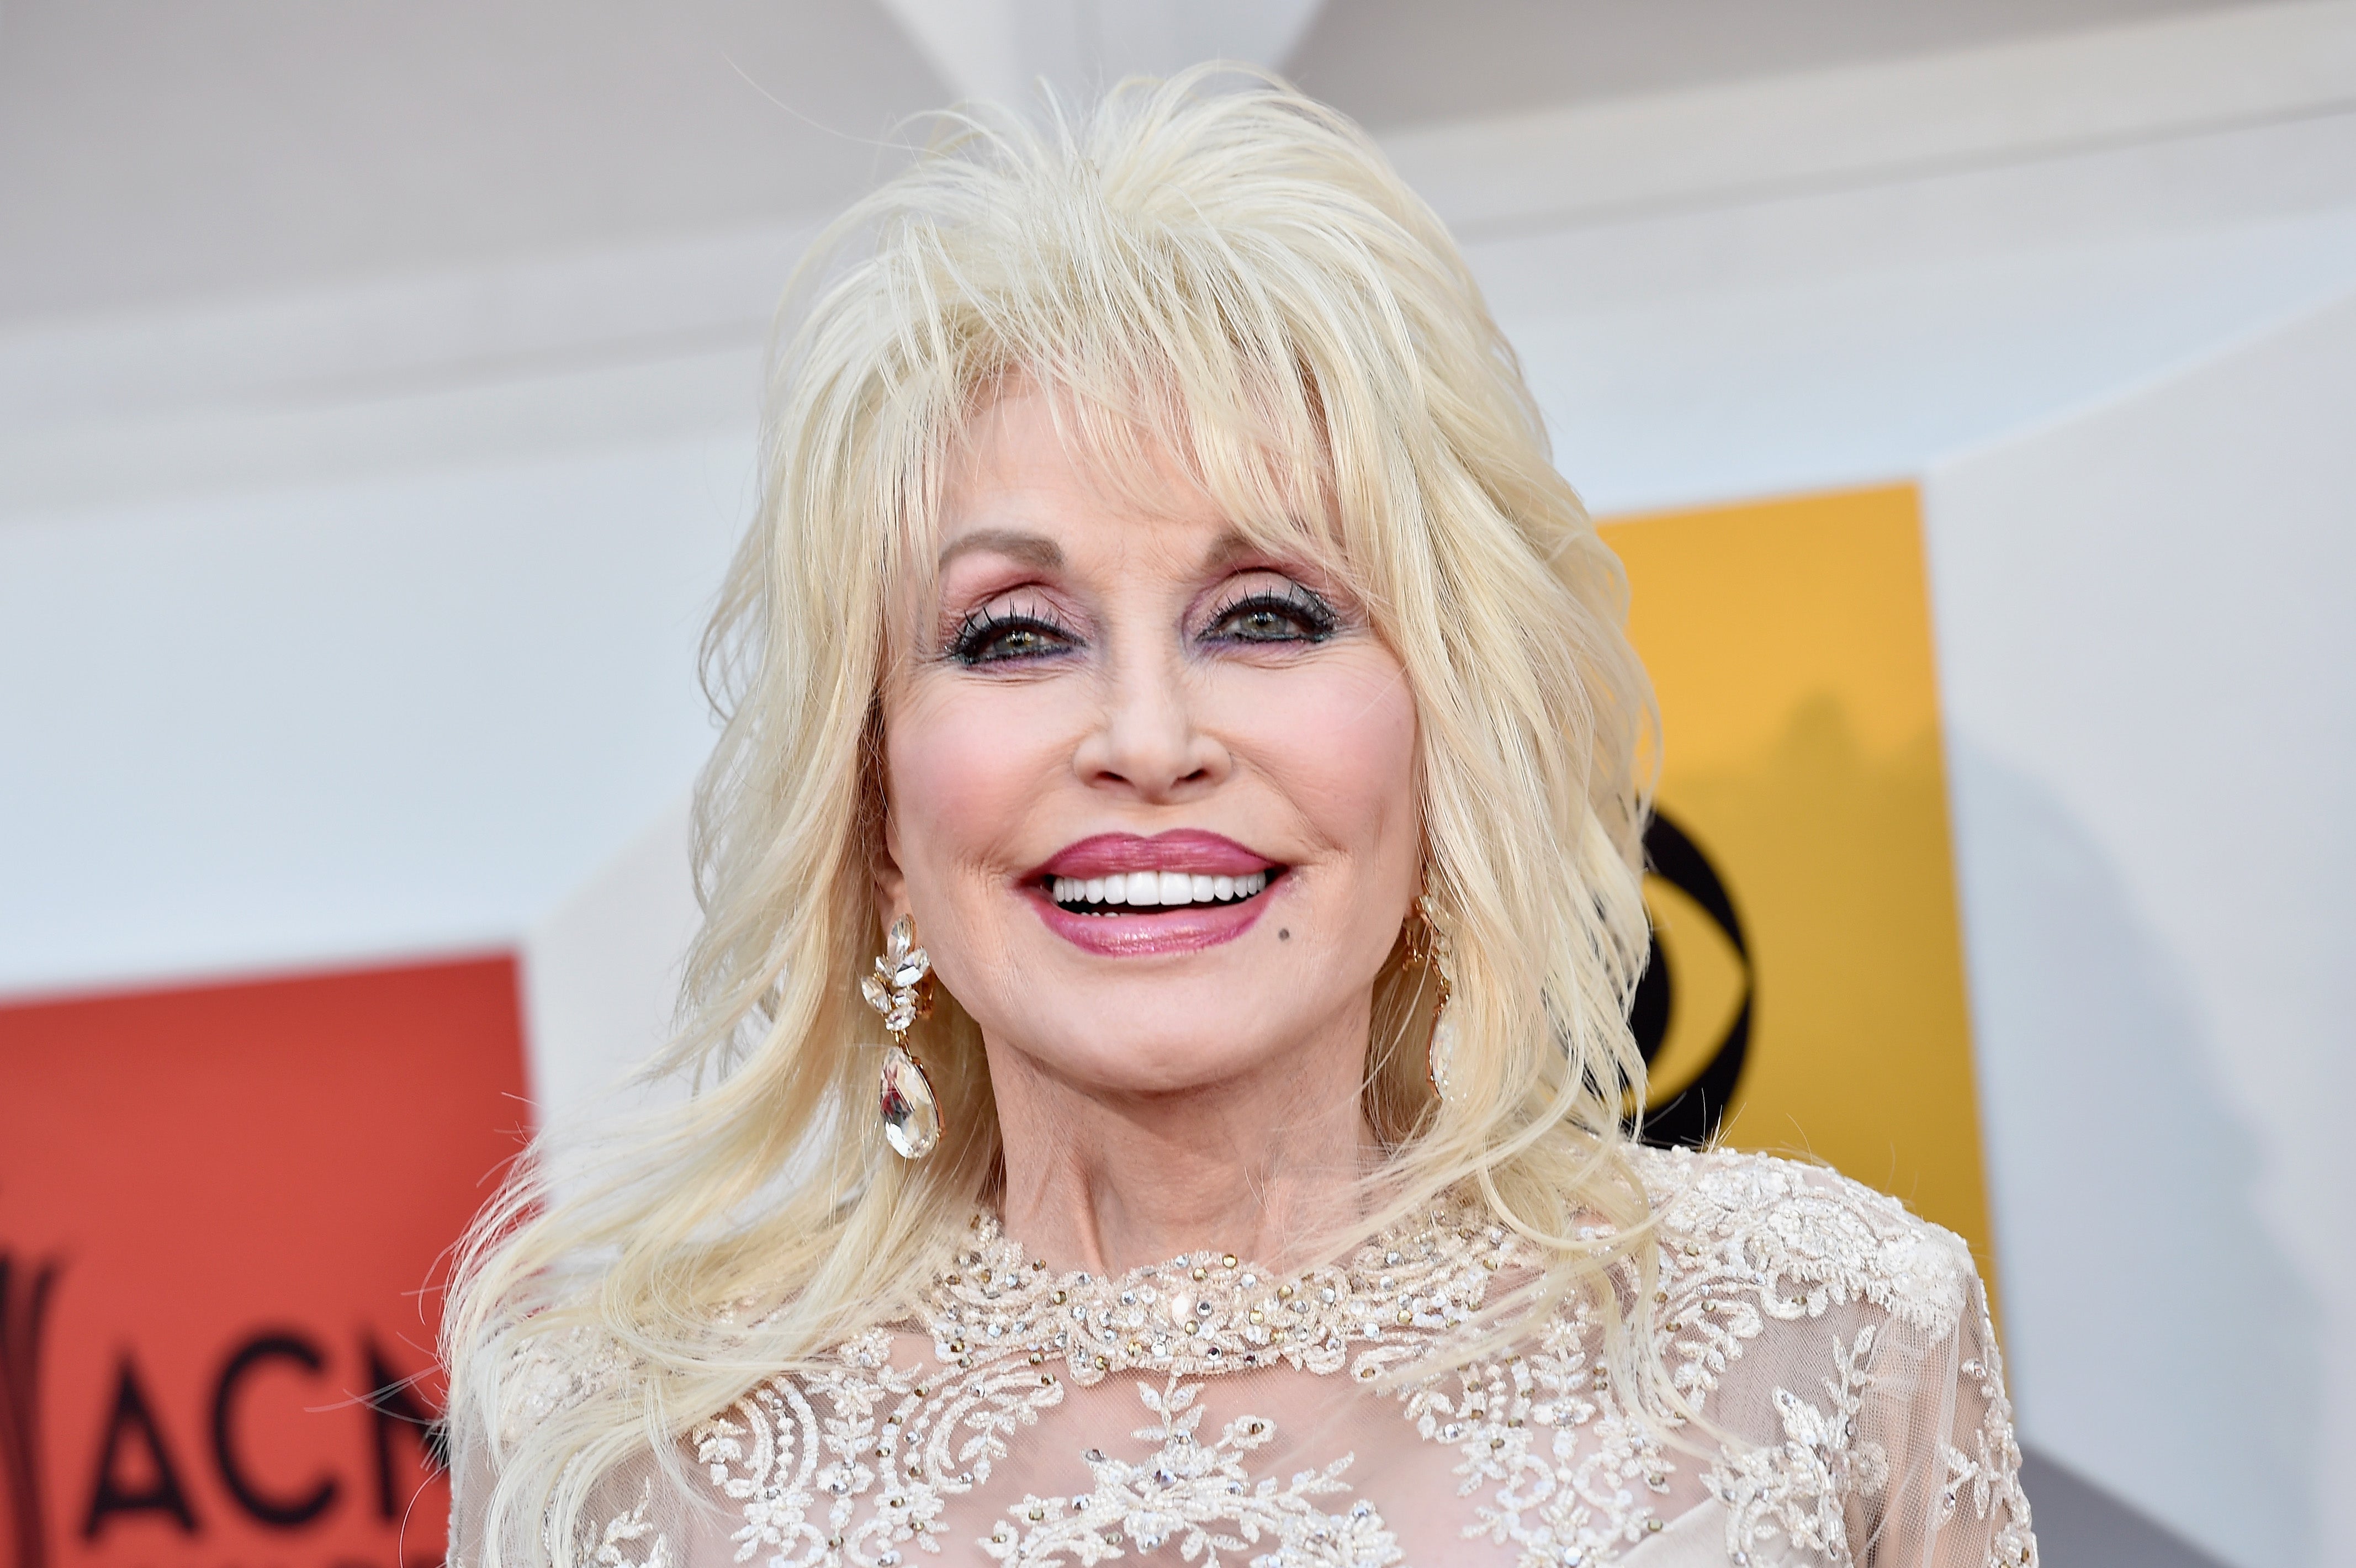 Dolly Parton reveals why her hair and makeup is always immaculate ‘I